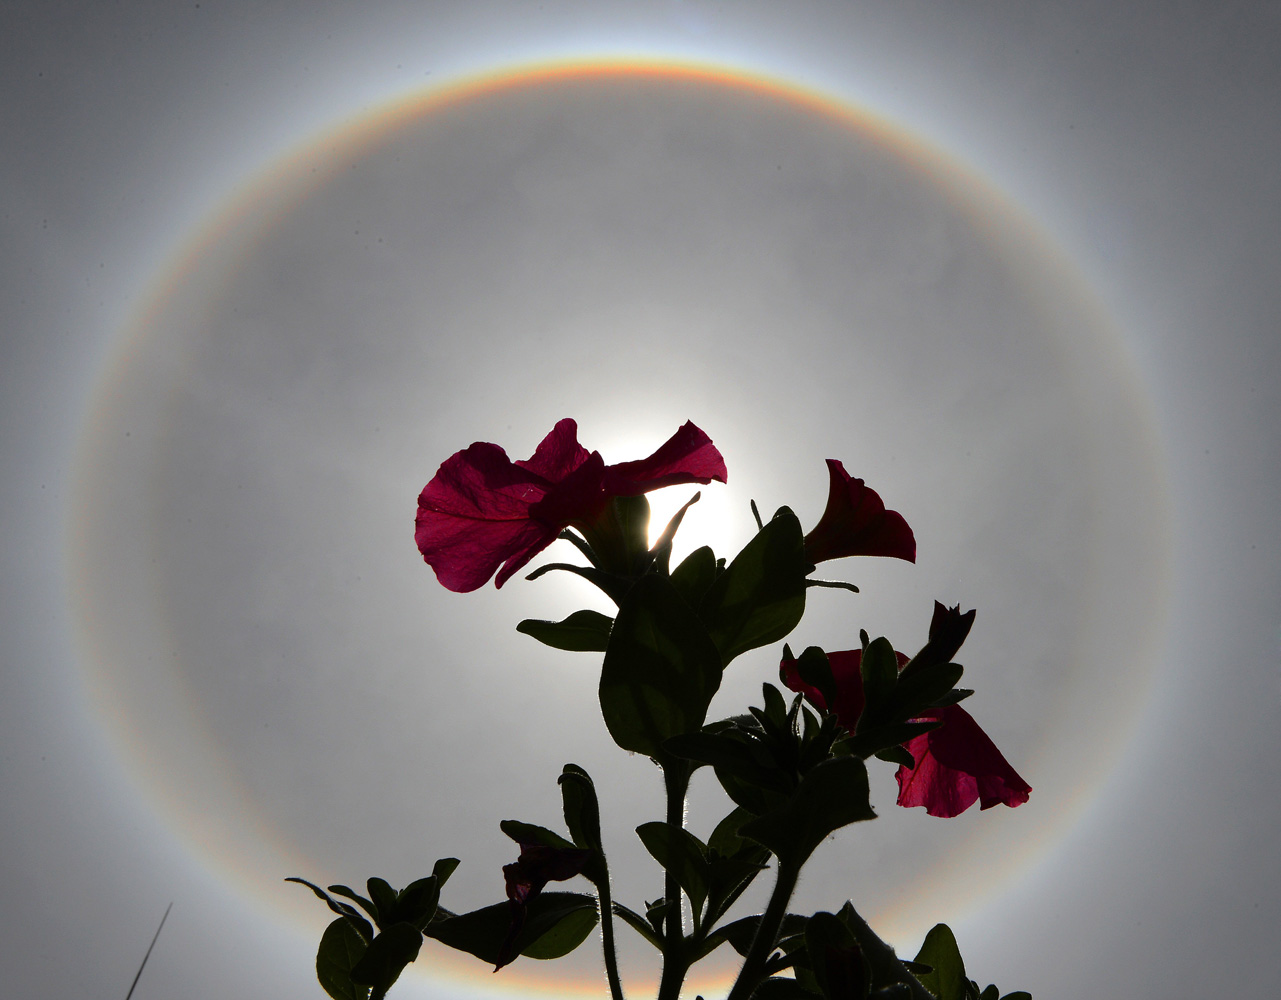 A Solar halo appears in the sky over Lhasa, capital of southwest China's Tibet Autonomous Region, May 5, 2014.